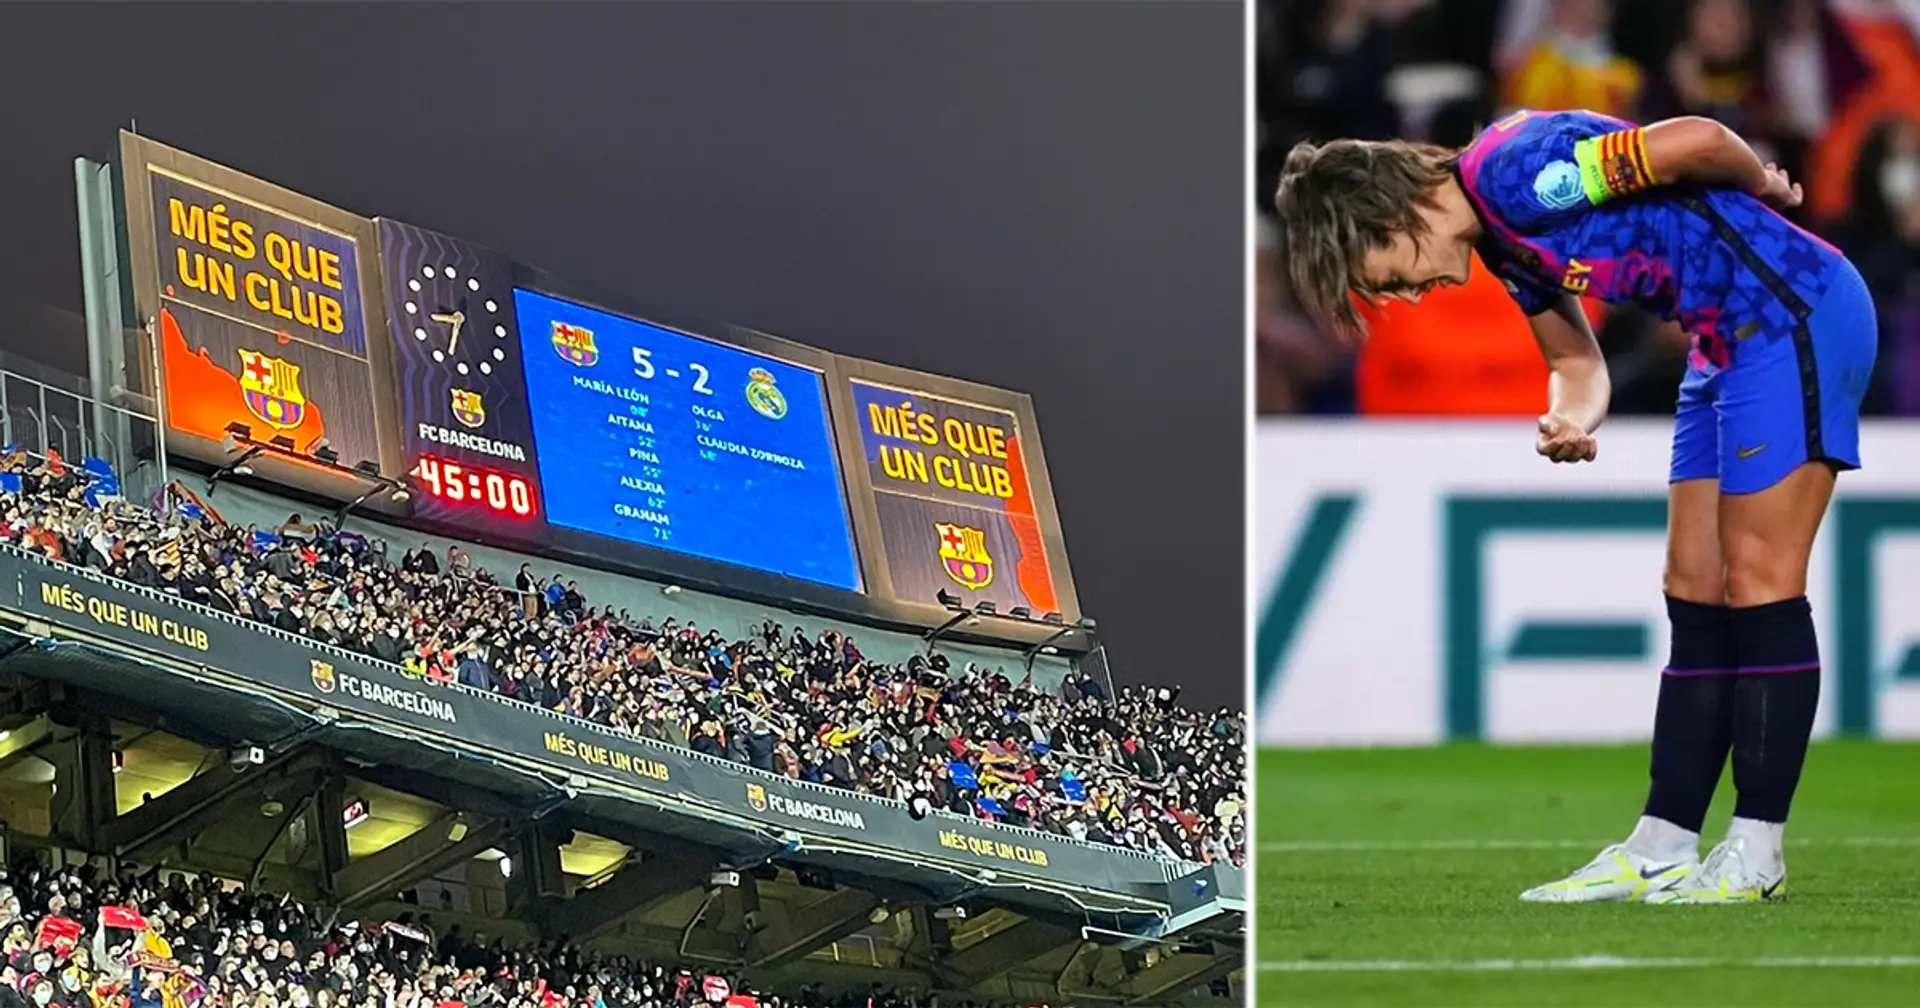 Barca Femeni put 5 past Real Madrid in record-breaking clash, advance to Champions League semifinals